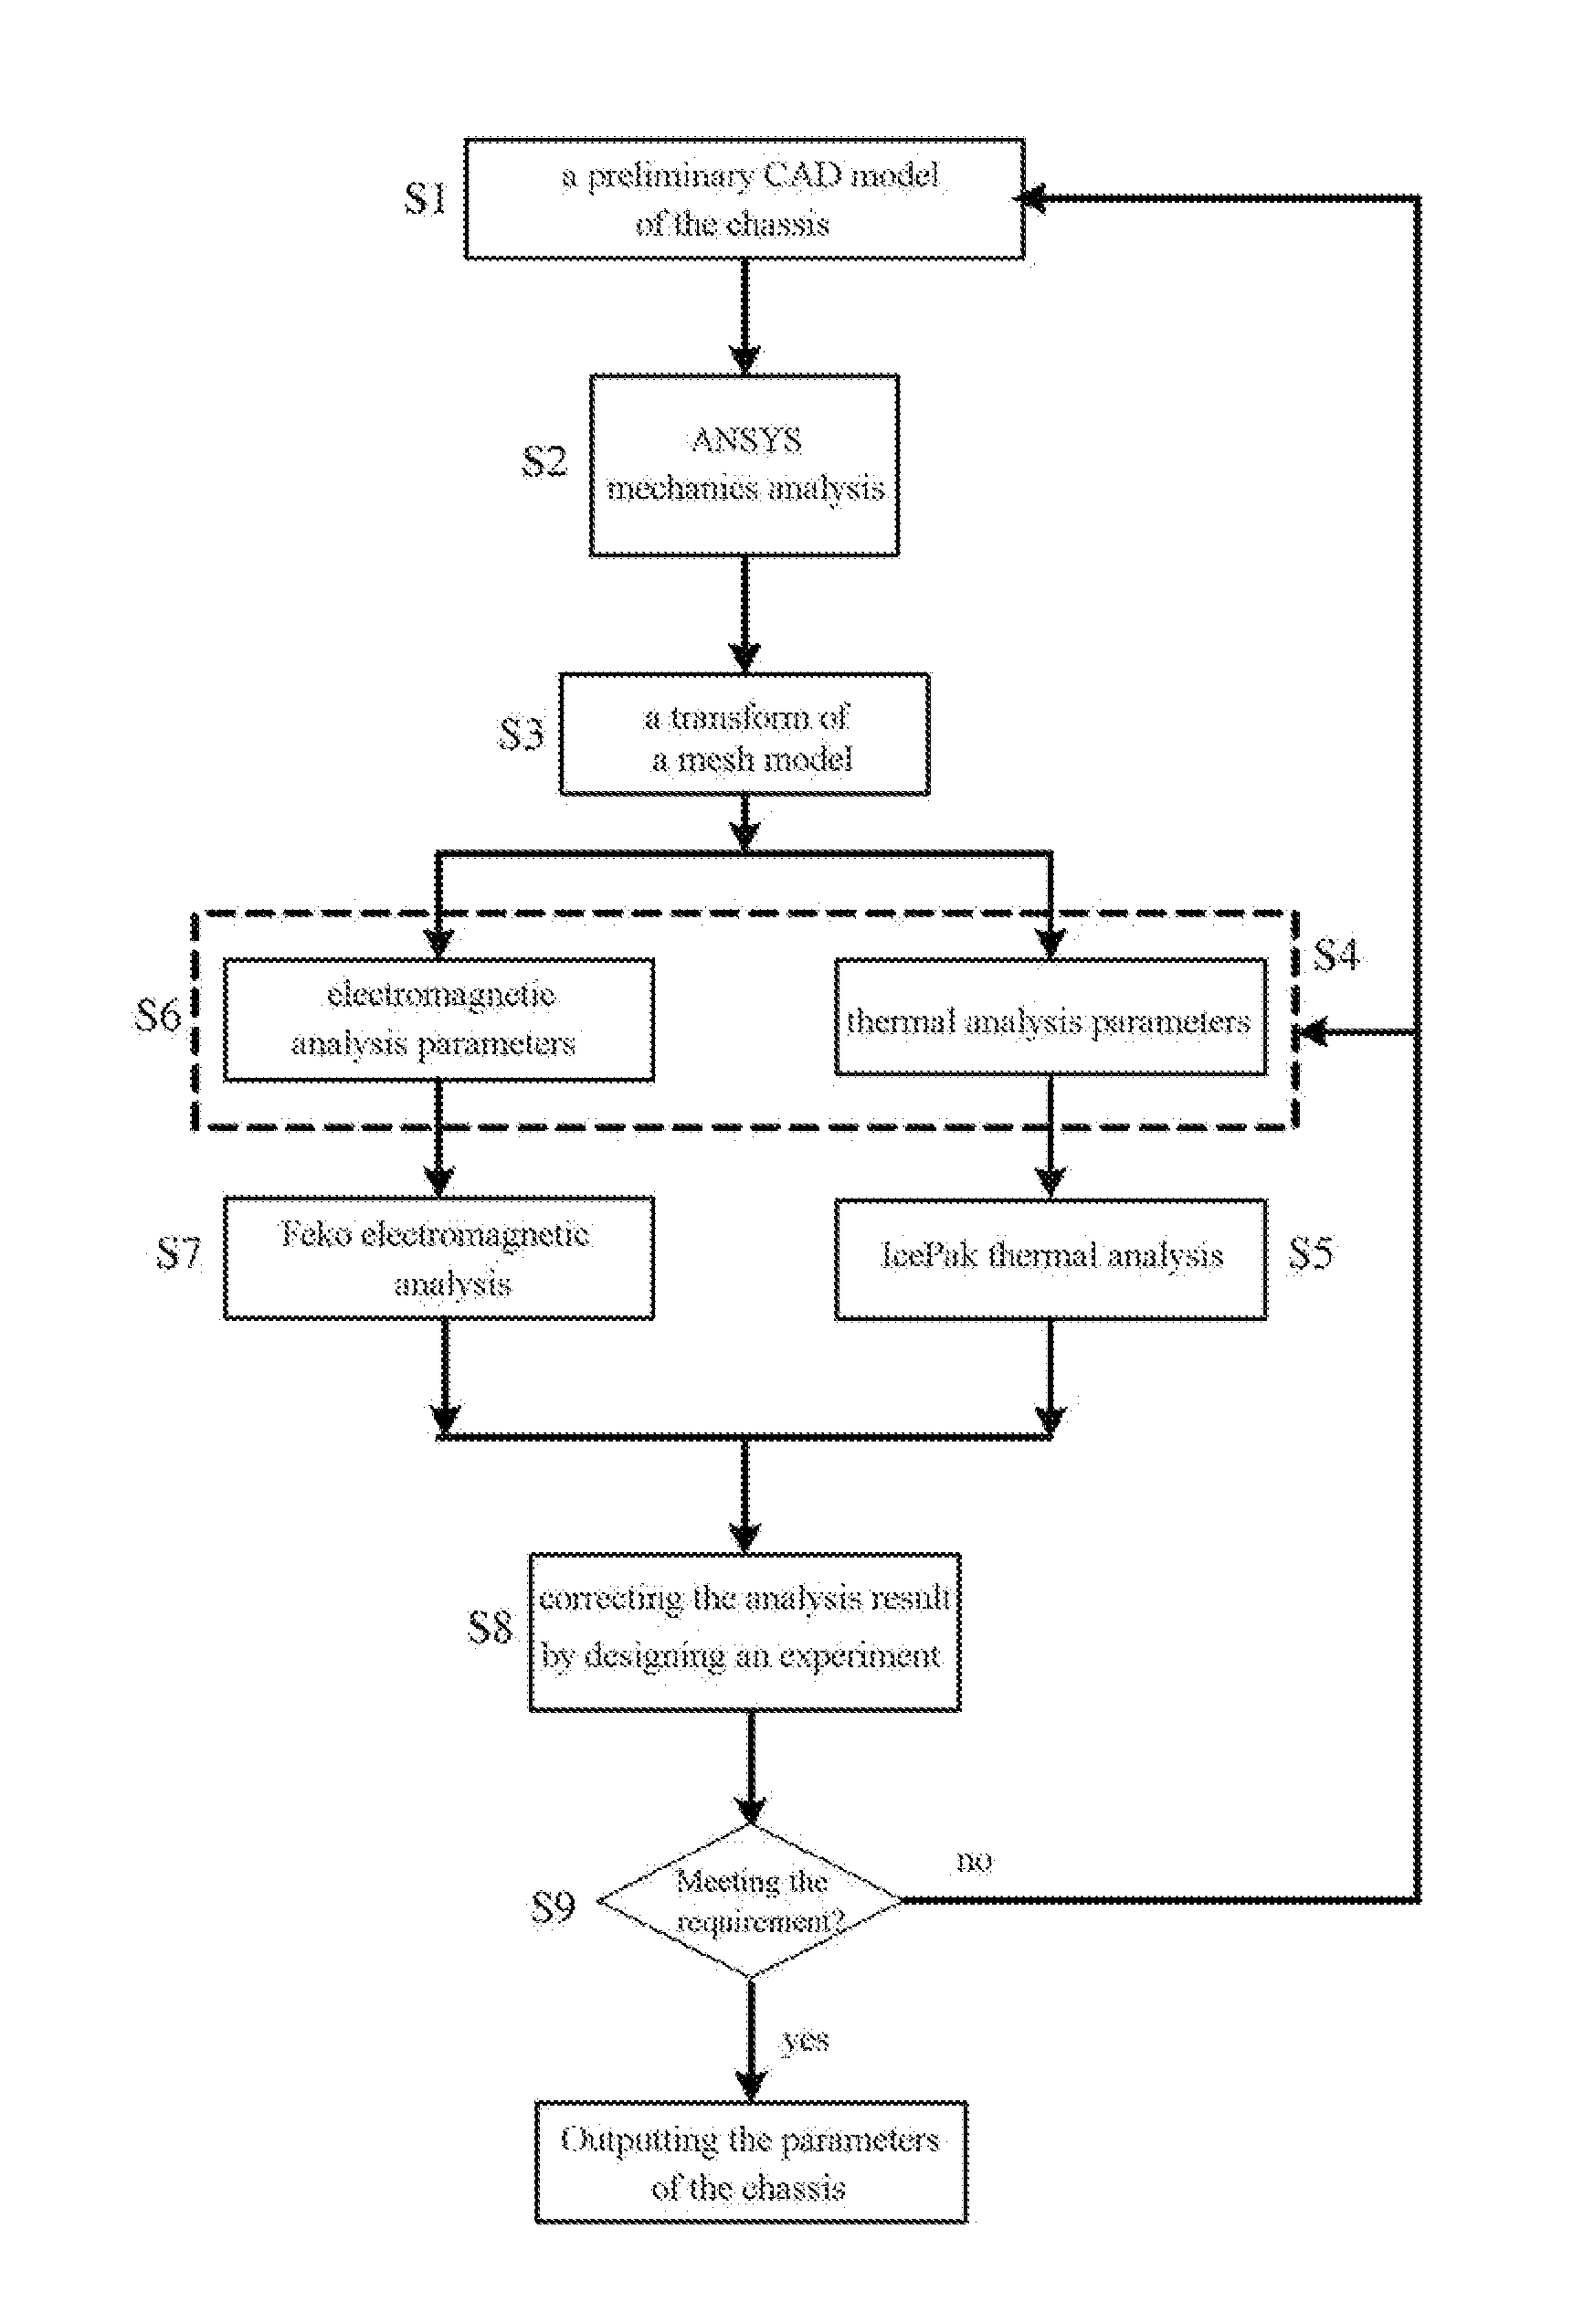 Optimization design method for the chassis structure of an electronic device based on mechanical, electrical and thermal three-field coupling